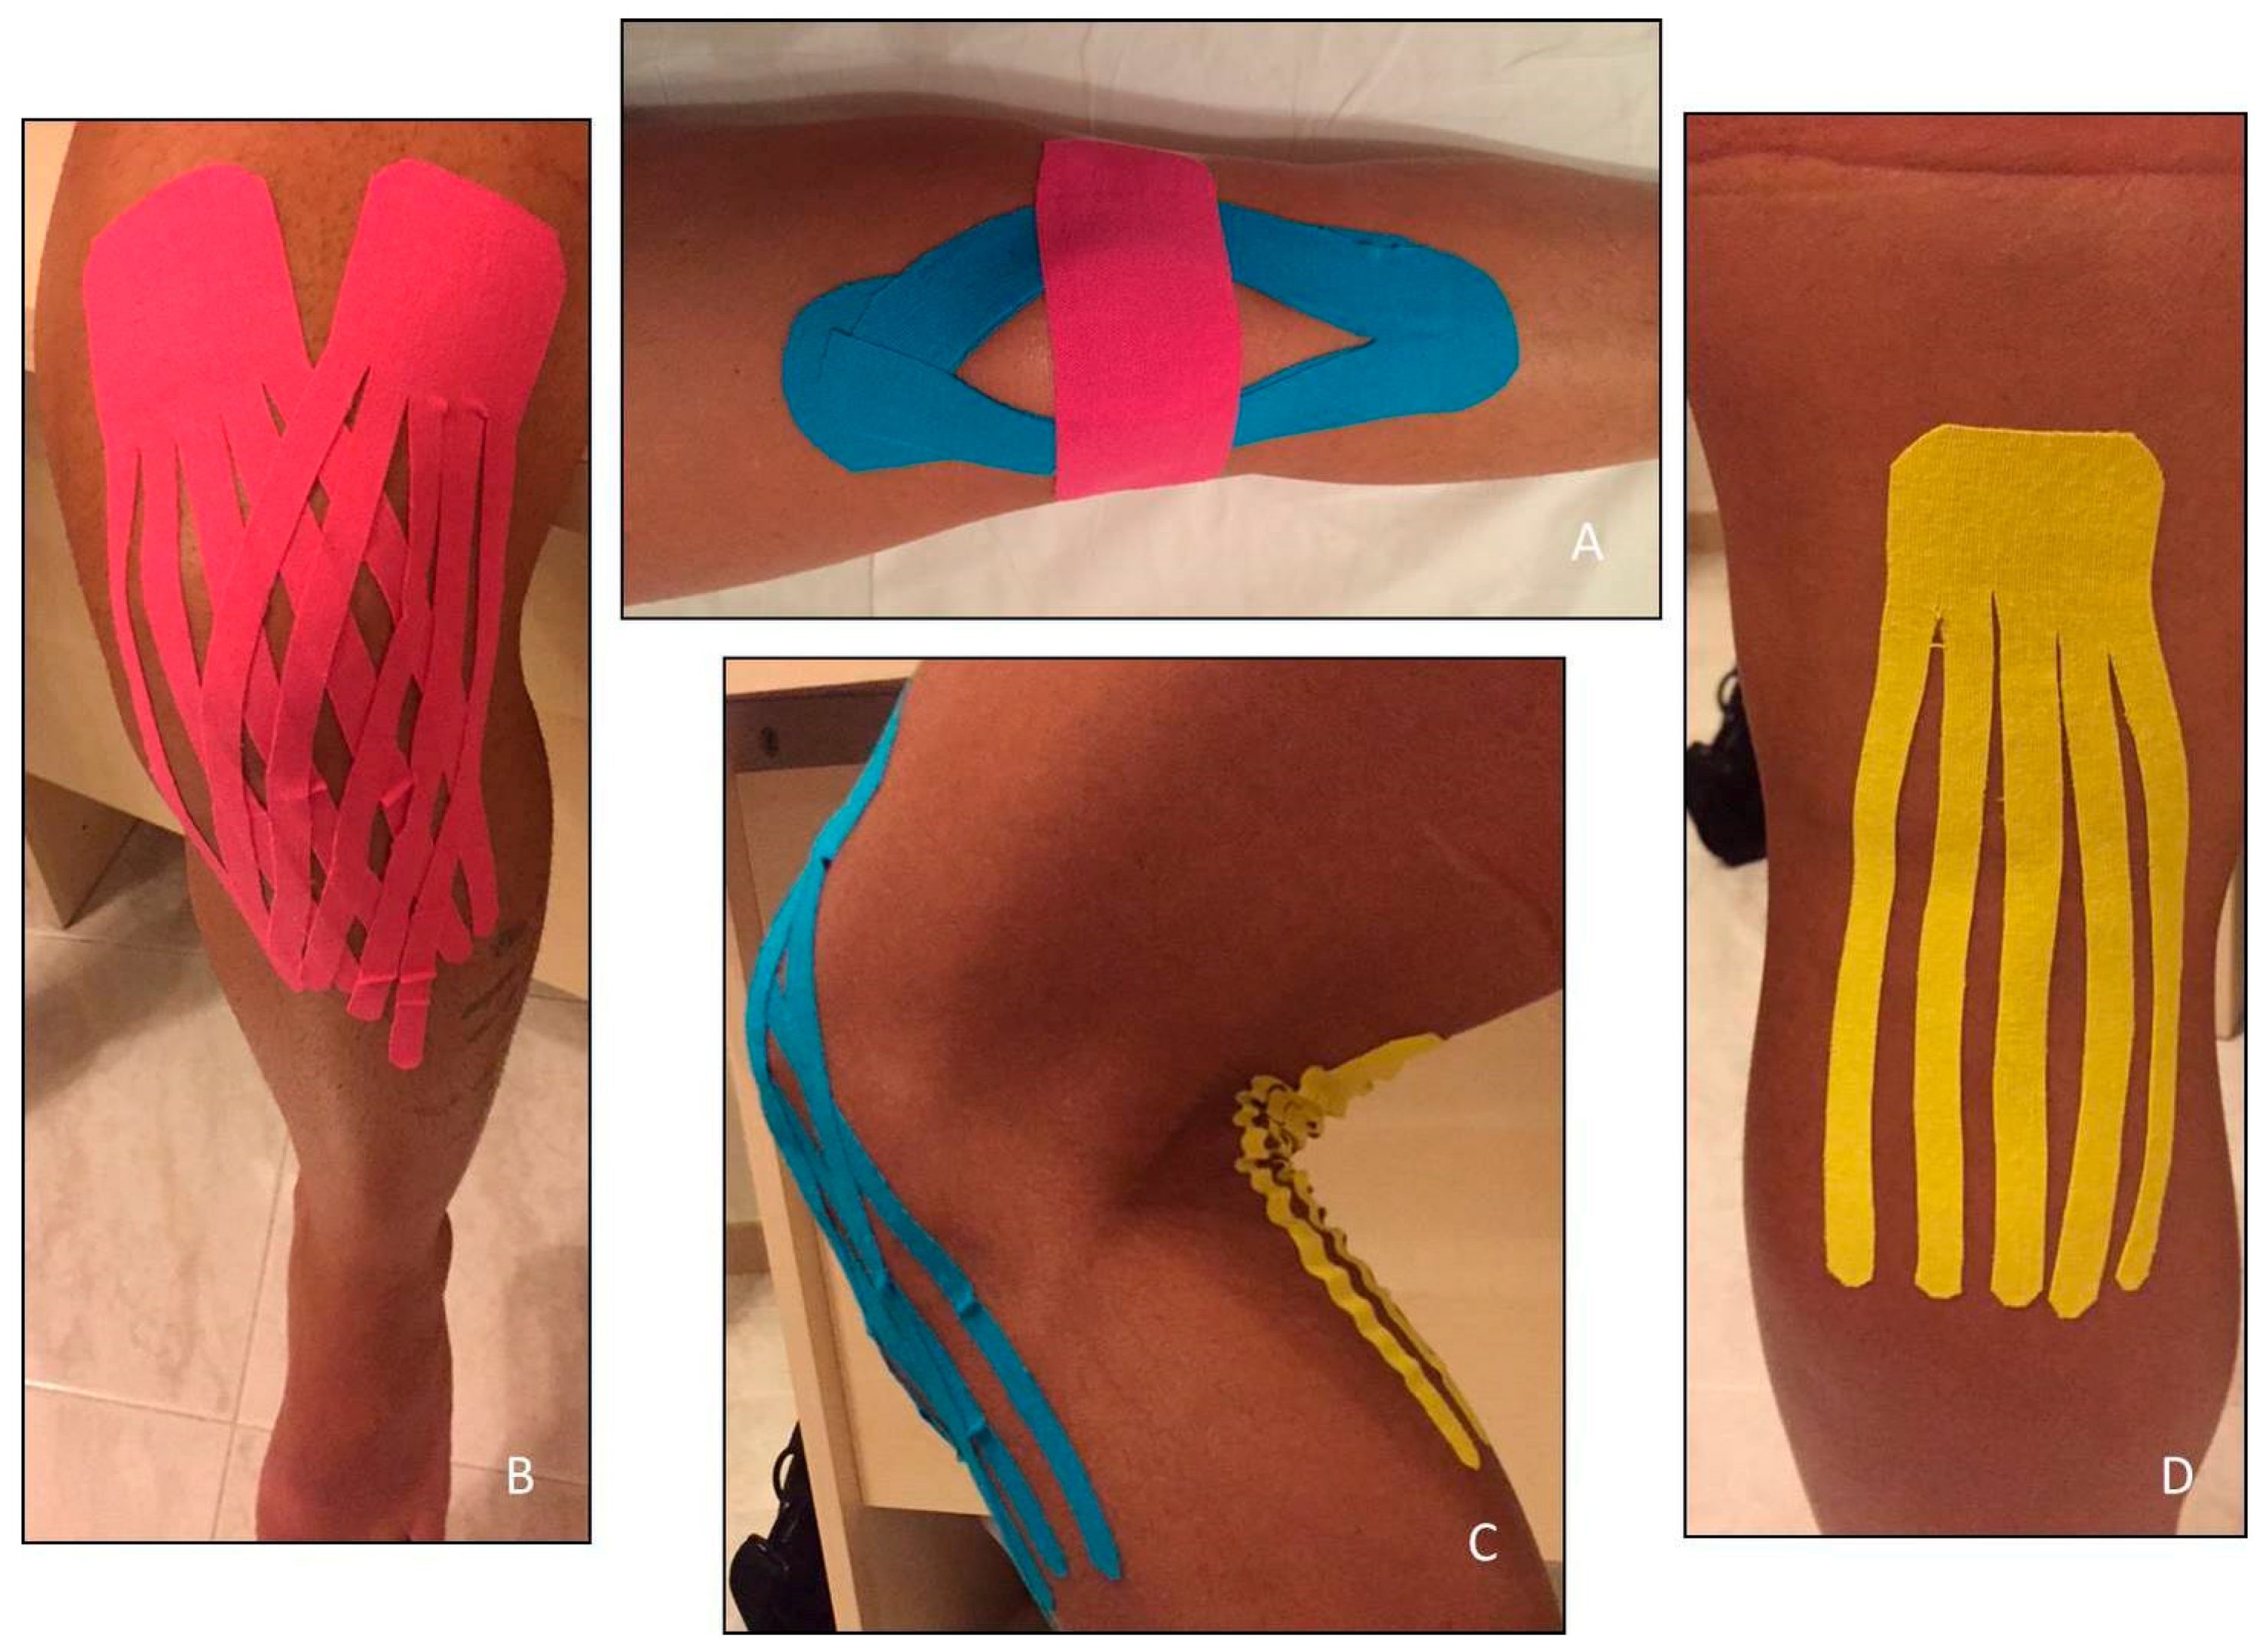 JFMK | Free Full-Text | The Effects of Exercise and Kinesio Tape on  Physical Limitations in Patients with Knee Osteoarthritis | HTML